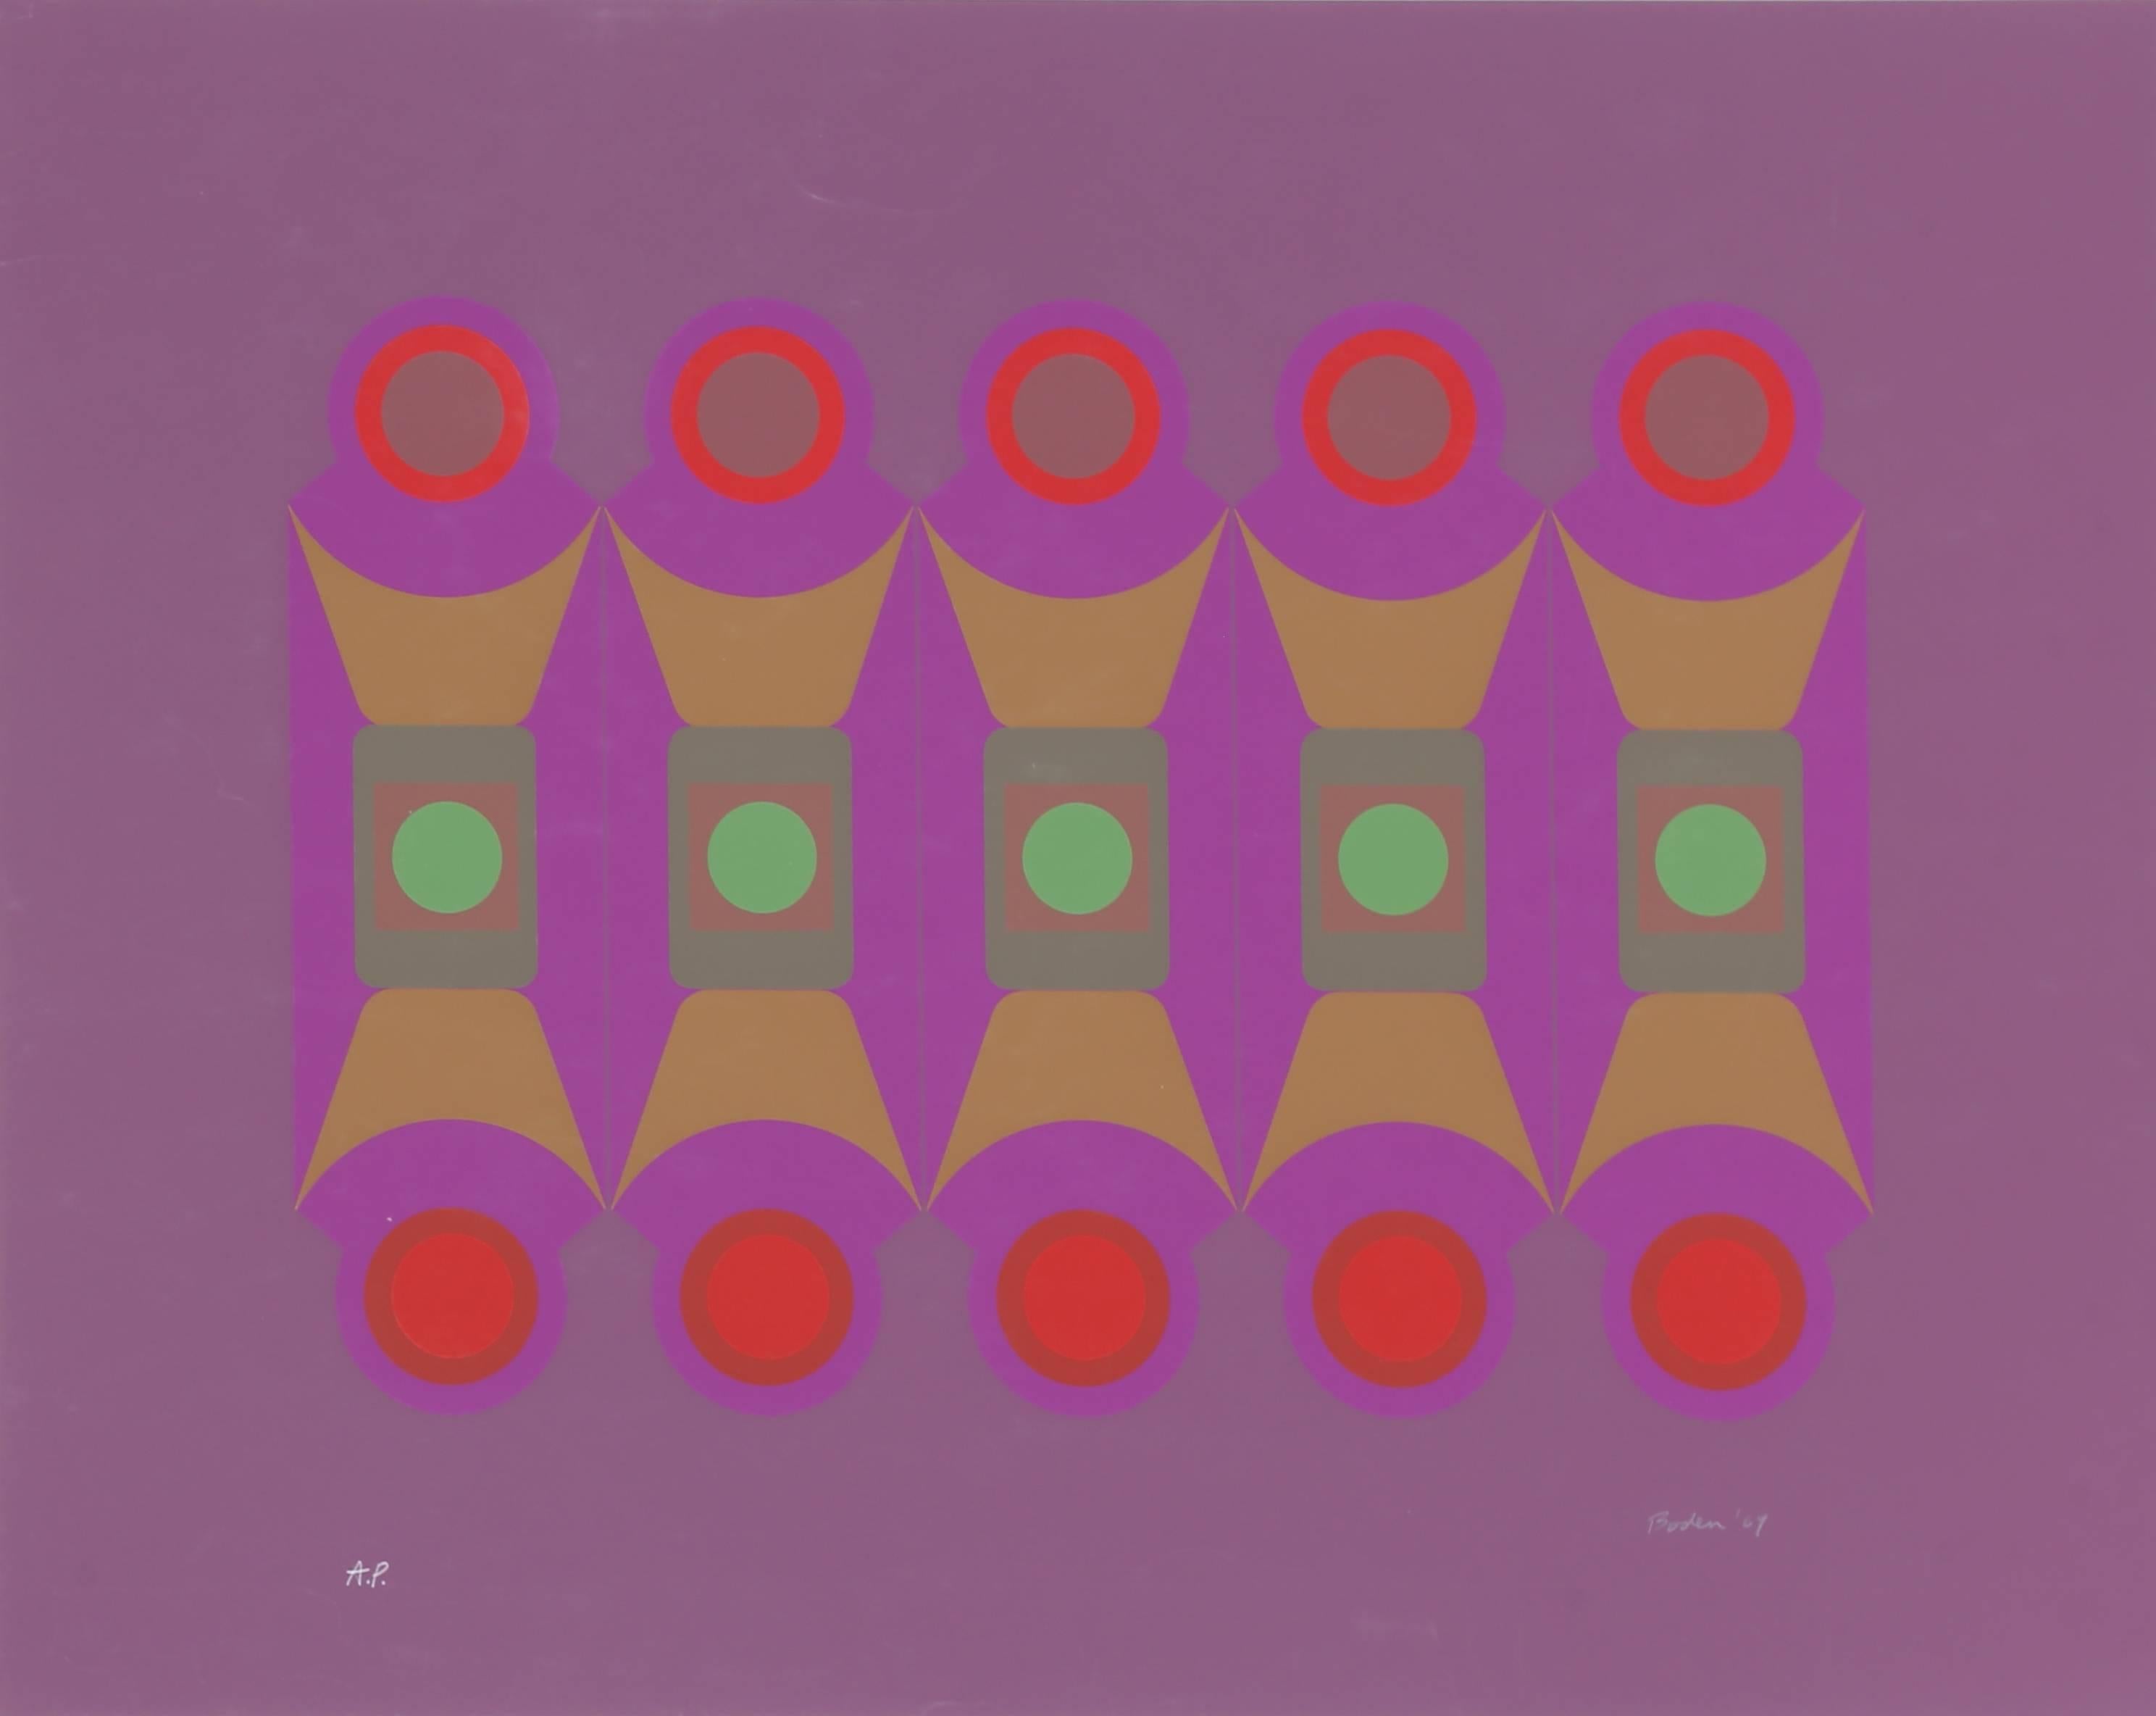 Artist: Arthur Boden
Title: Untitled 
Year: 1969
Medium: Serigraph, signed in pencil
Edition: AP
Size: 23 in. x 29.5 in. (58.42 cm x 74.93 cm)